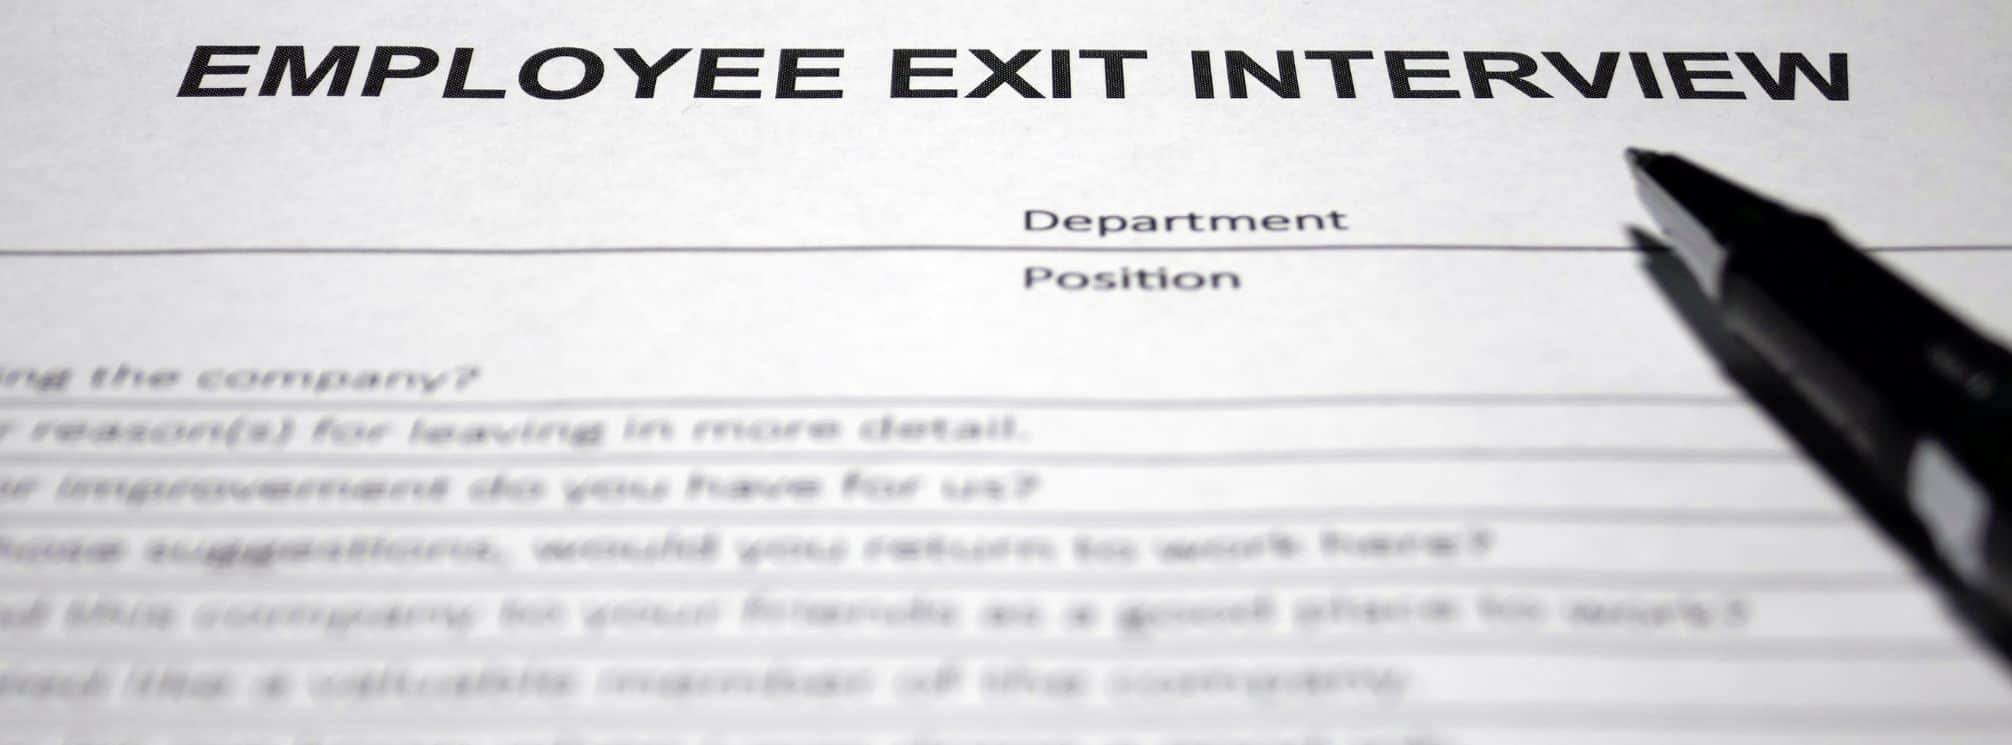 photo of a printed survey that says "employee exit interview" at the top with a pen resting on the paper